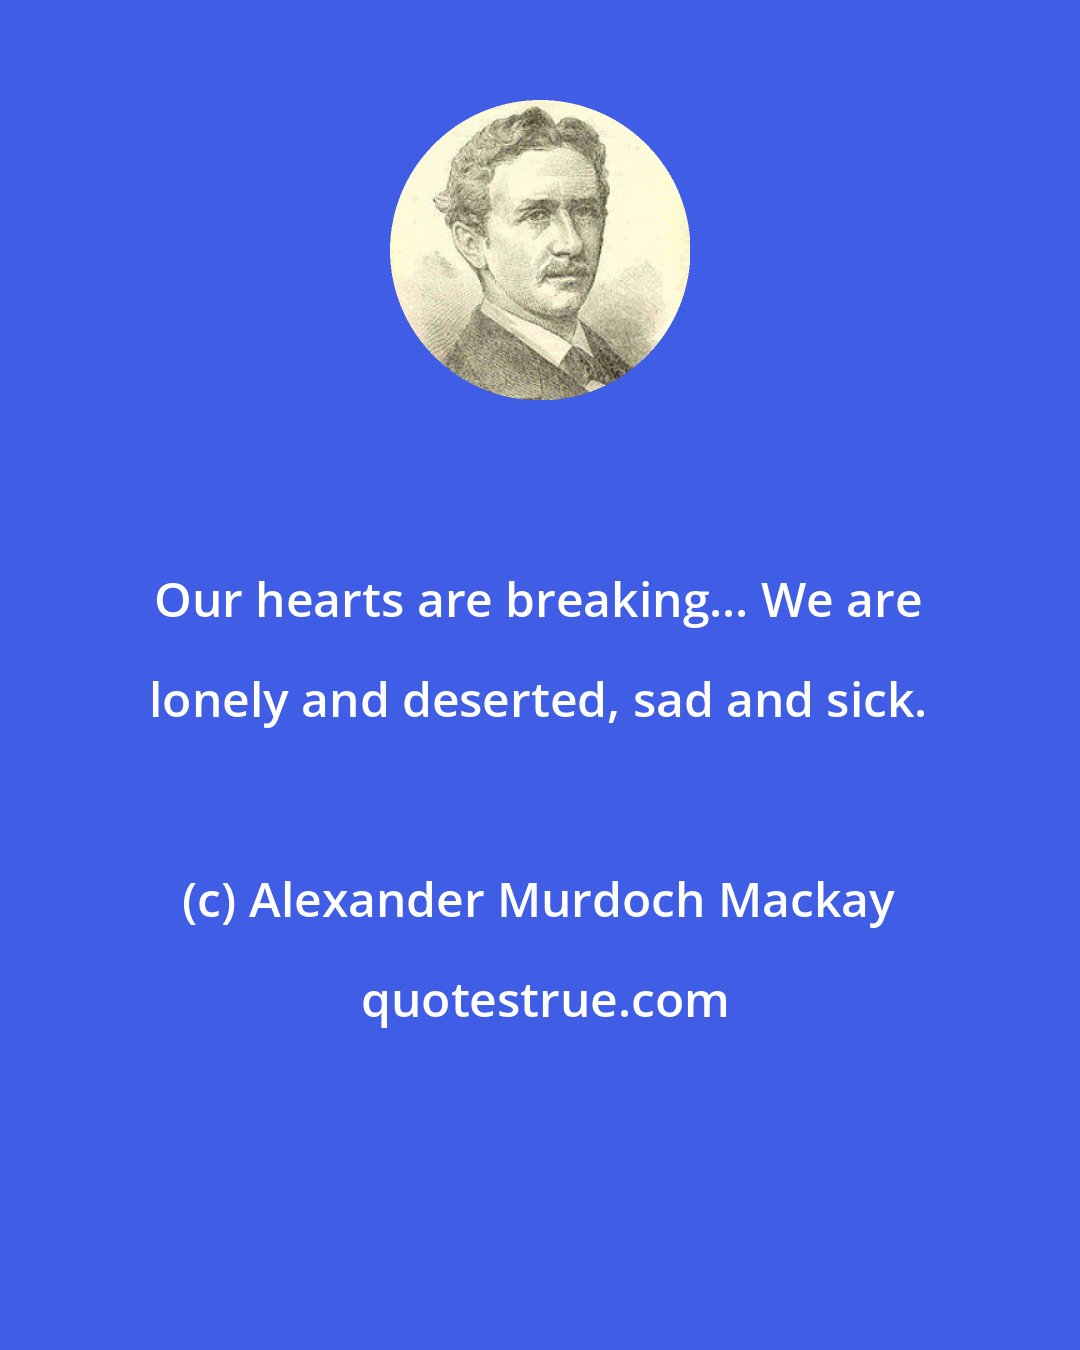 Alexander Murdoch Mackay: Our hearts are breaking... We are lonely and deserted, sad and sick.